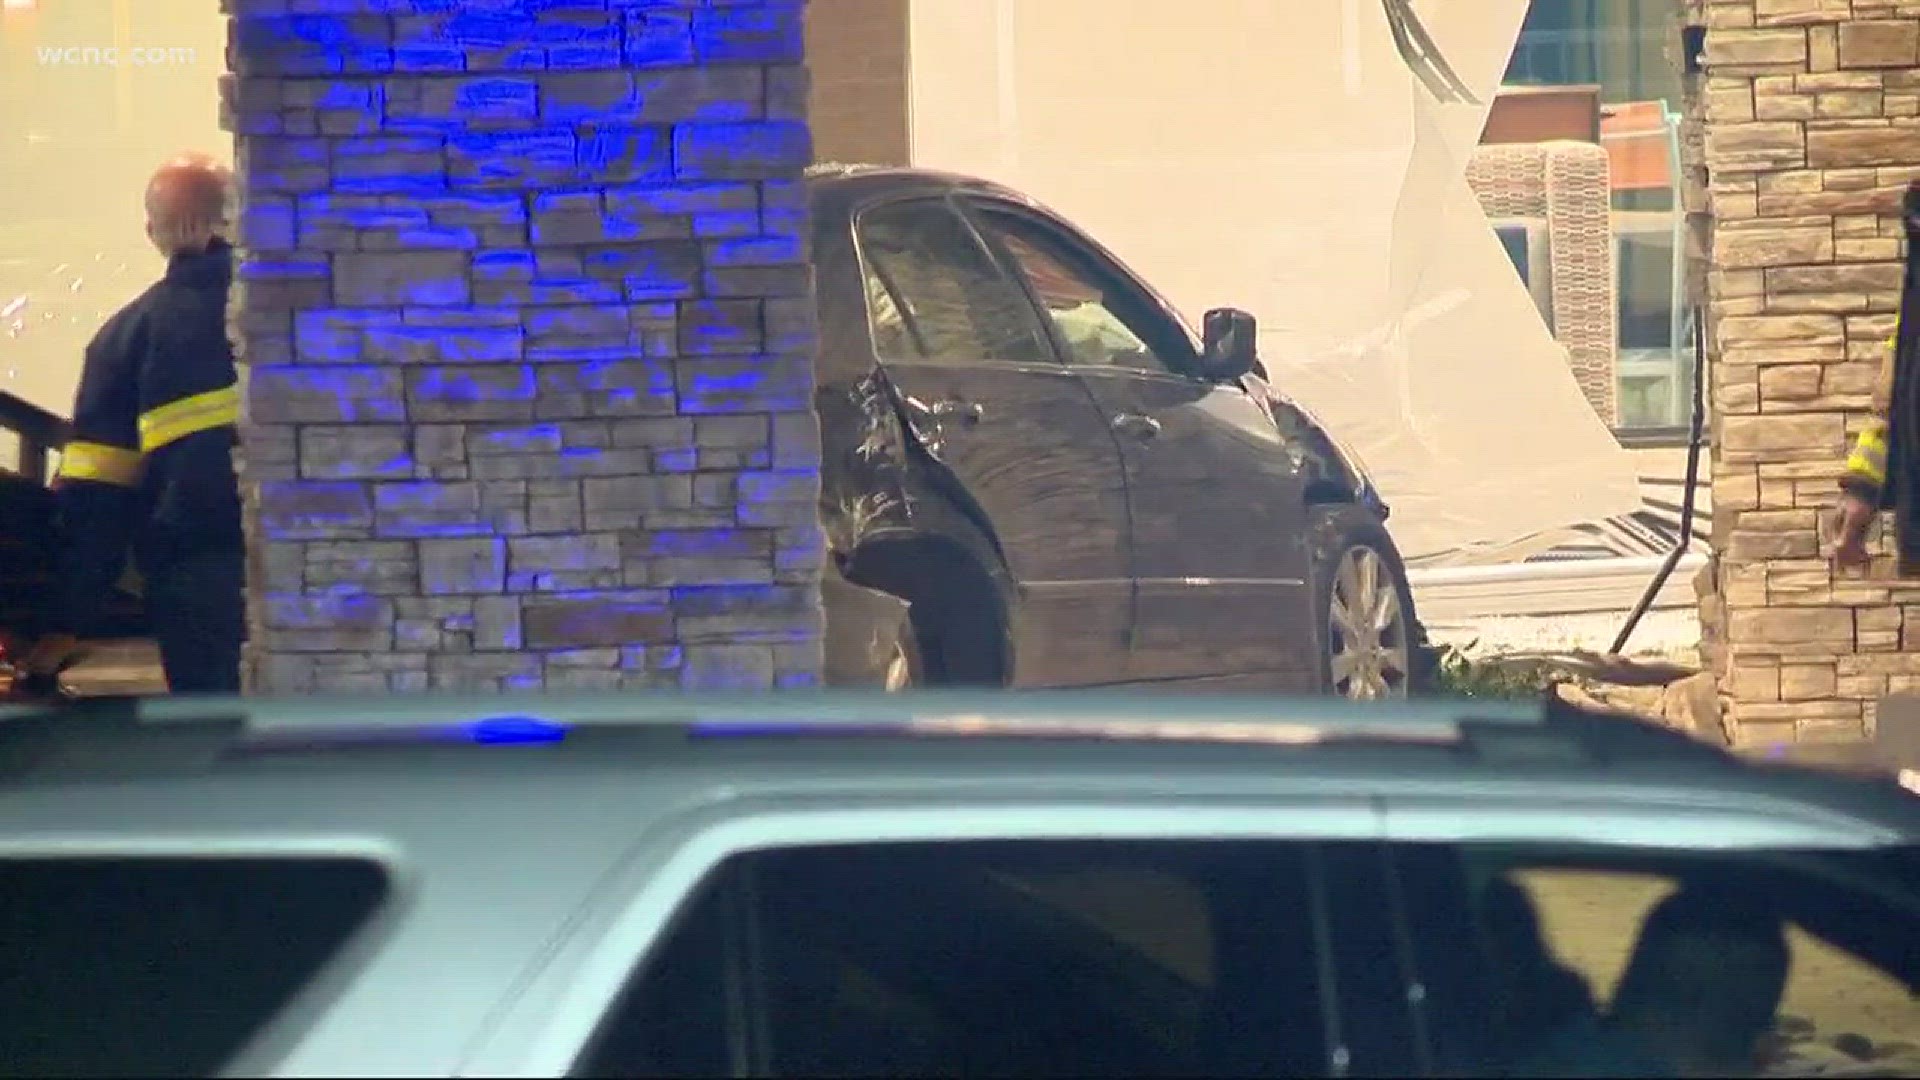 Medic says one person was rushed to the hospital after a car slammed into a hotel in north Charlotte.